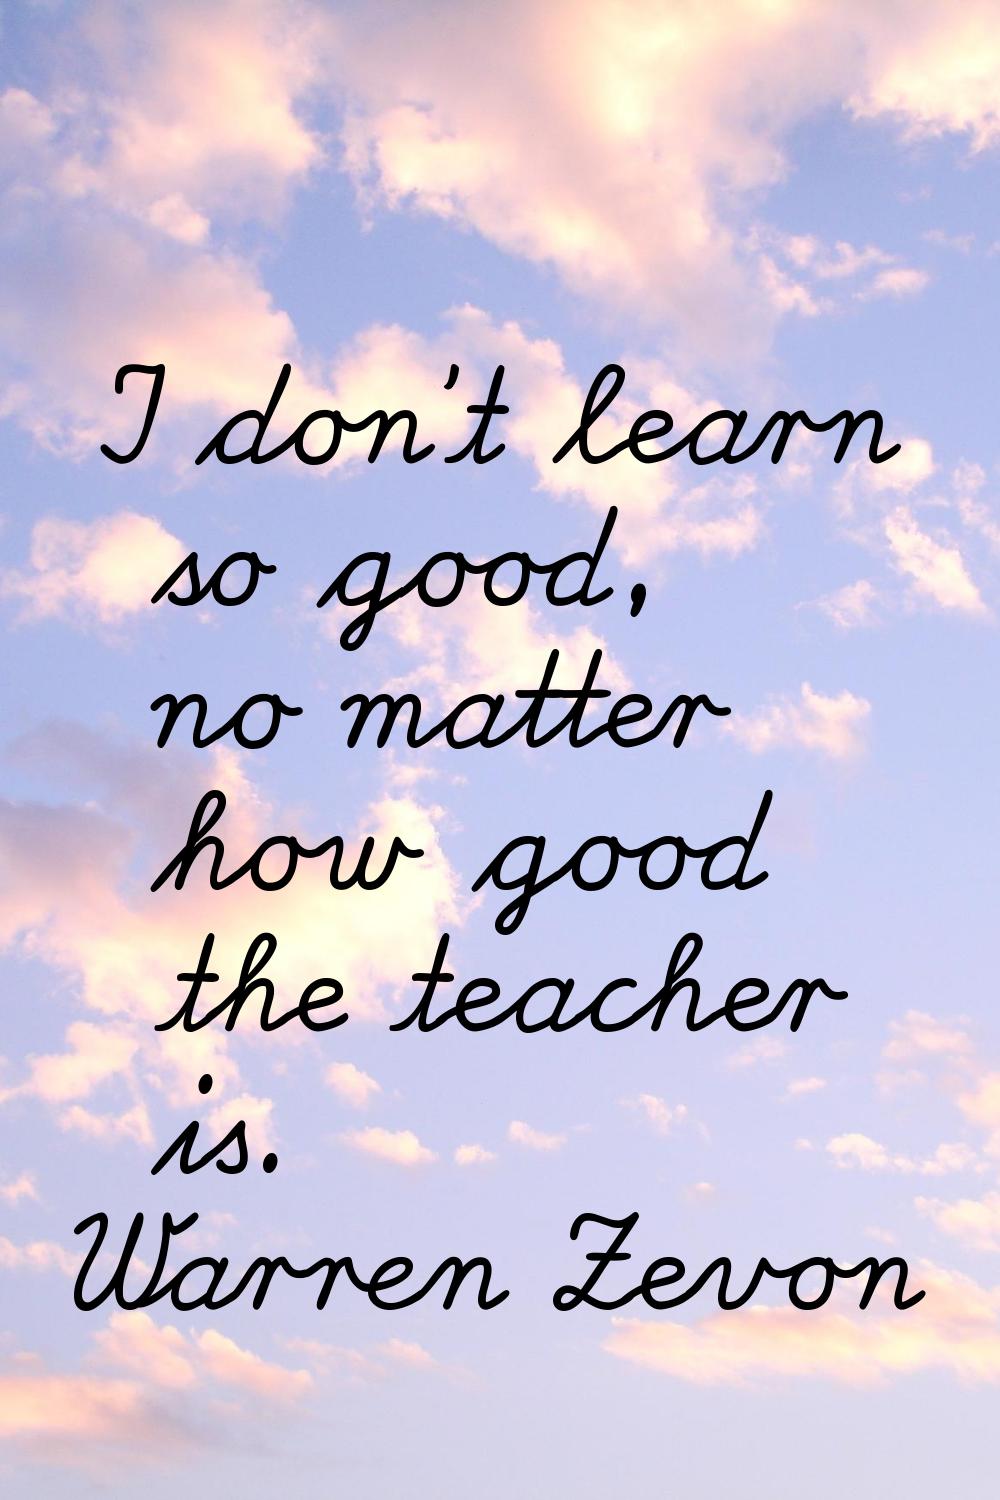 I don't learn so good, no matter how good the teacher is.